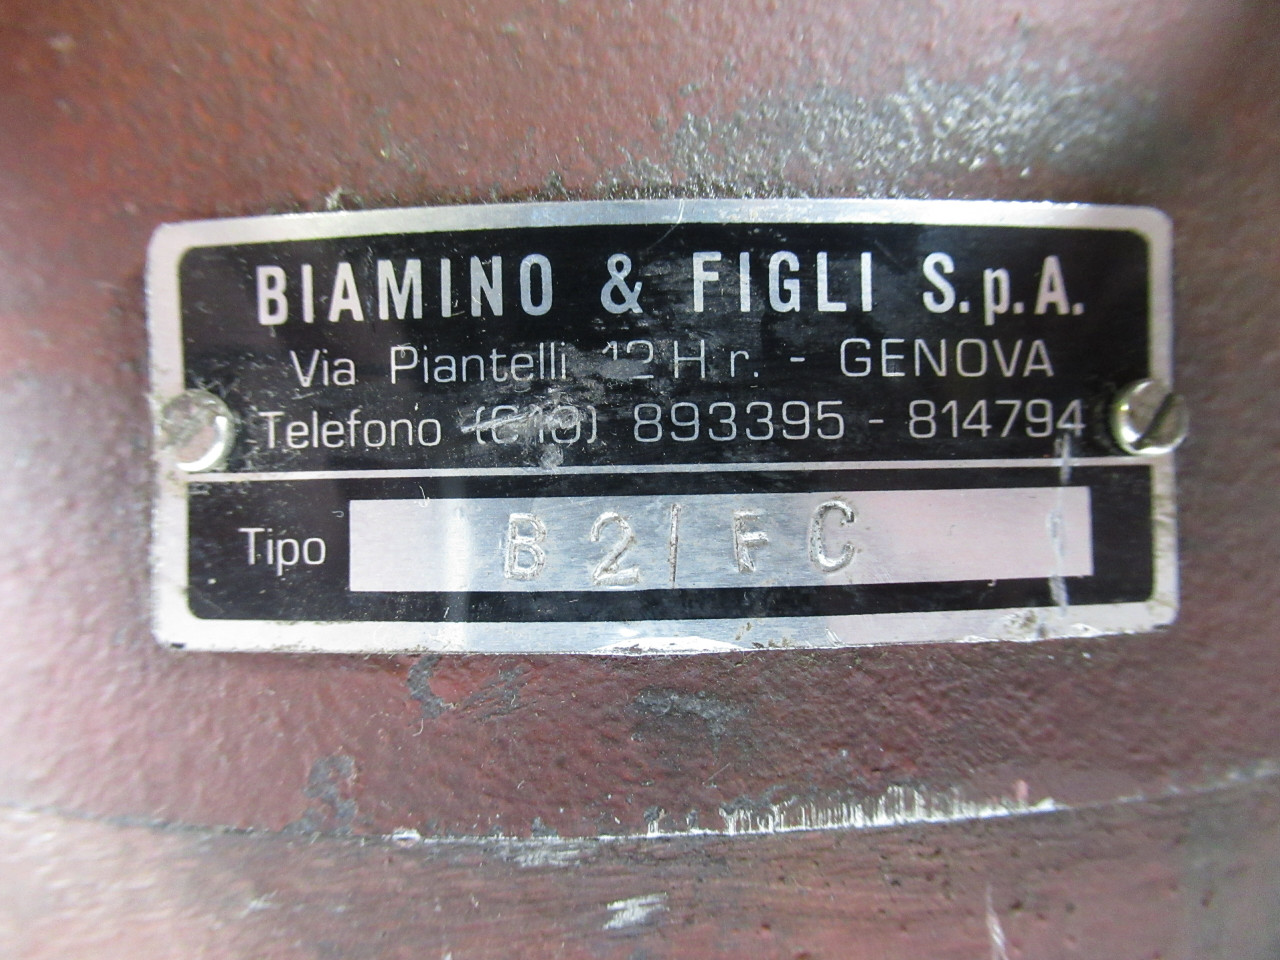 Biamino & Figli S.p.A B2-FC Variable Gear Unit 24.06mm Output RED ! NOP !